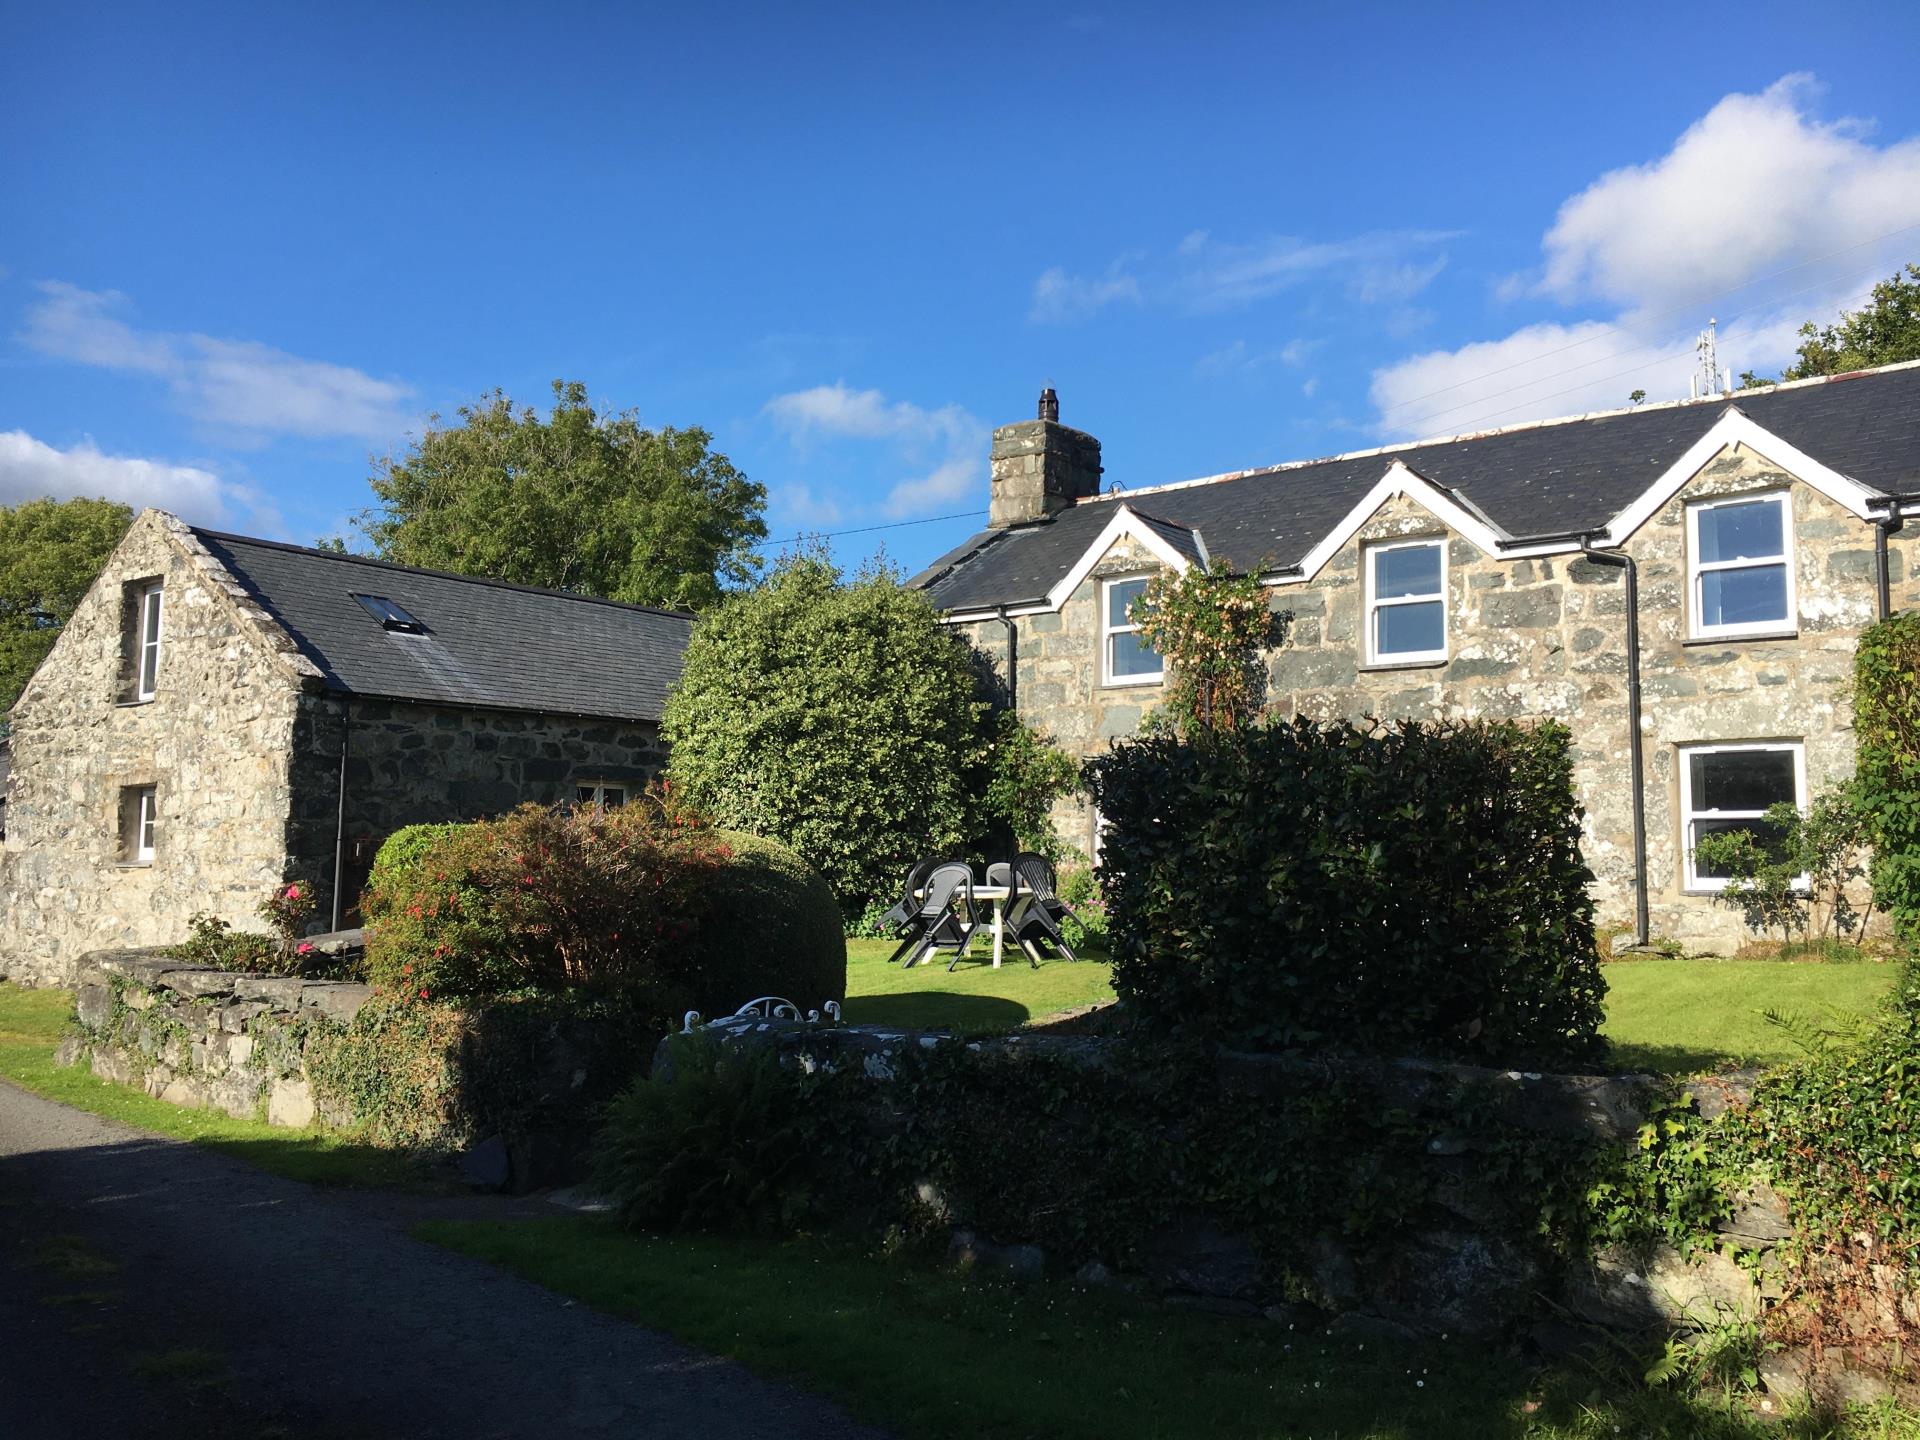 Talwrn Bach Farmhouse and Stable cottage